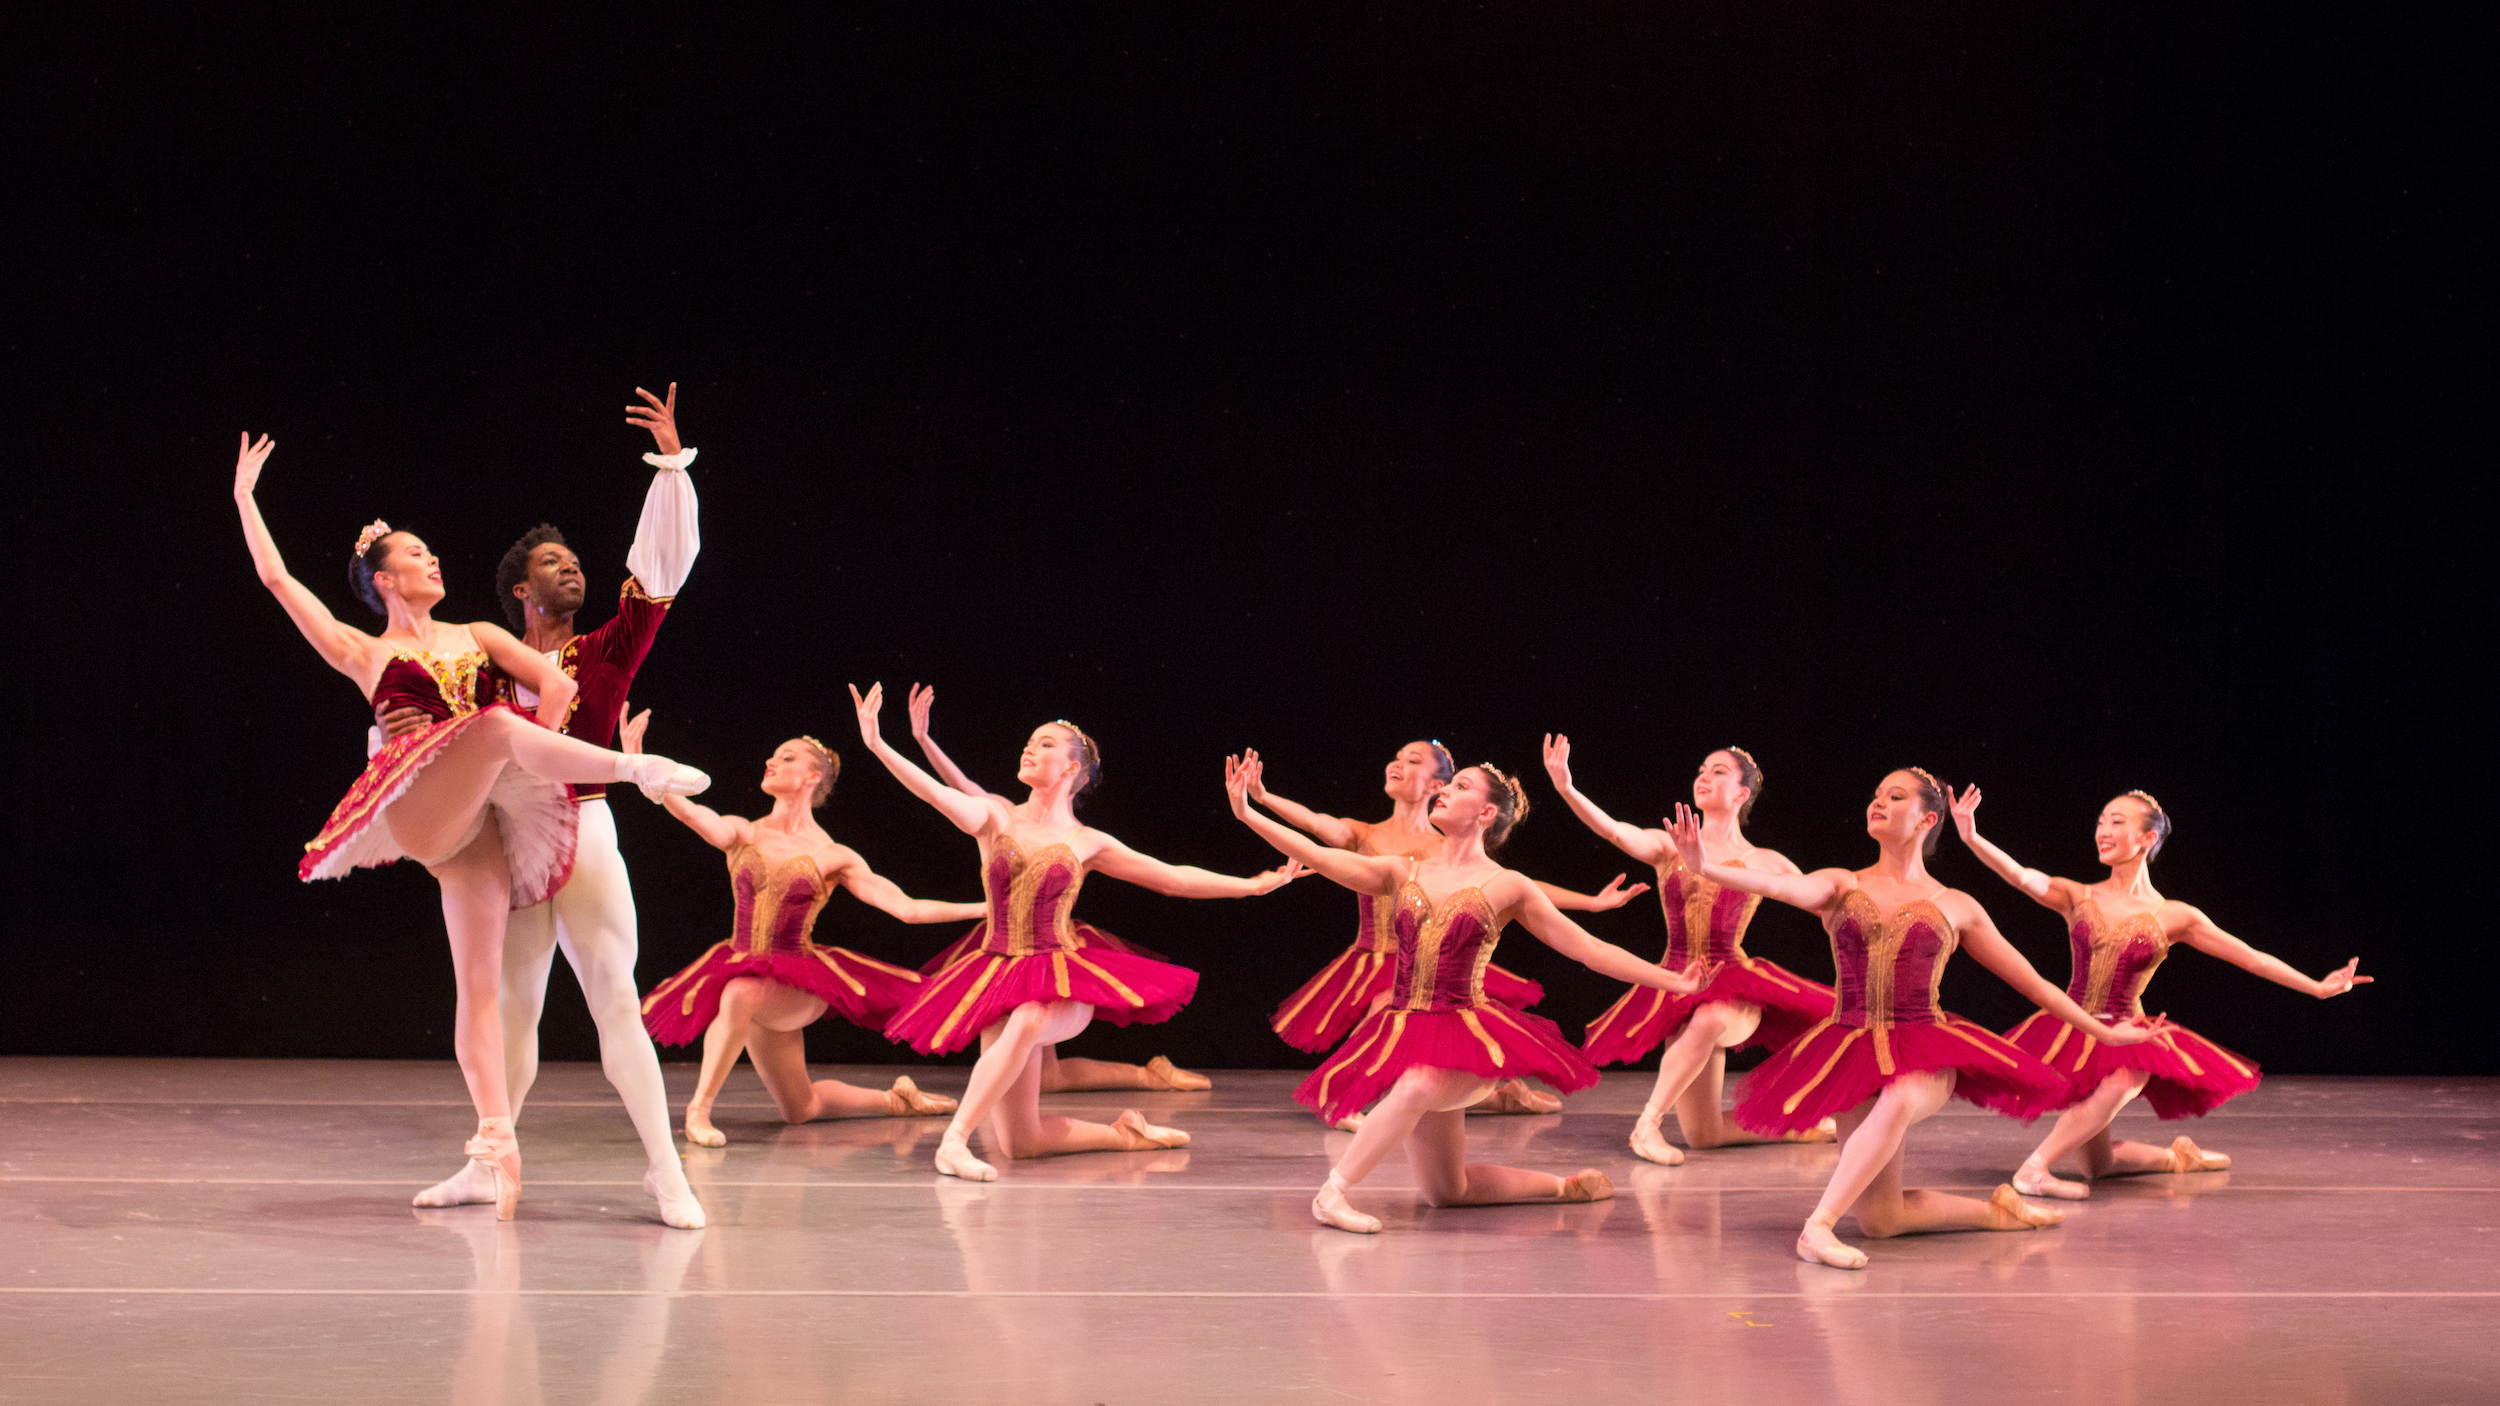 A group of eight ballerinas in red tutus kneel on their right knee in two diagonal lines and gesture toward a lead principal couple to their right. The principal ballerina, in a red tutus and gold tiara, poses in an attitude front on pointe with her right arm raised and her left hand on her hip. Her male partner stands behind her in tendu, holding her waist with his right hand and raising his left arm up.